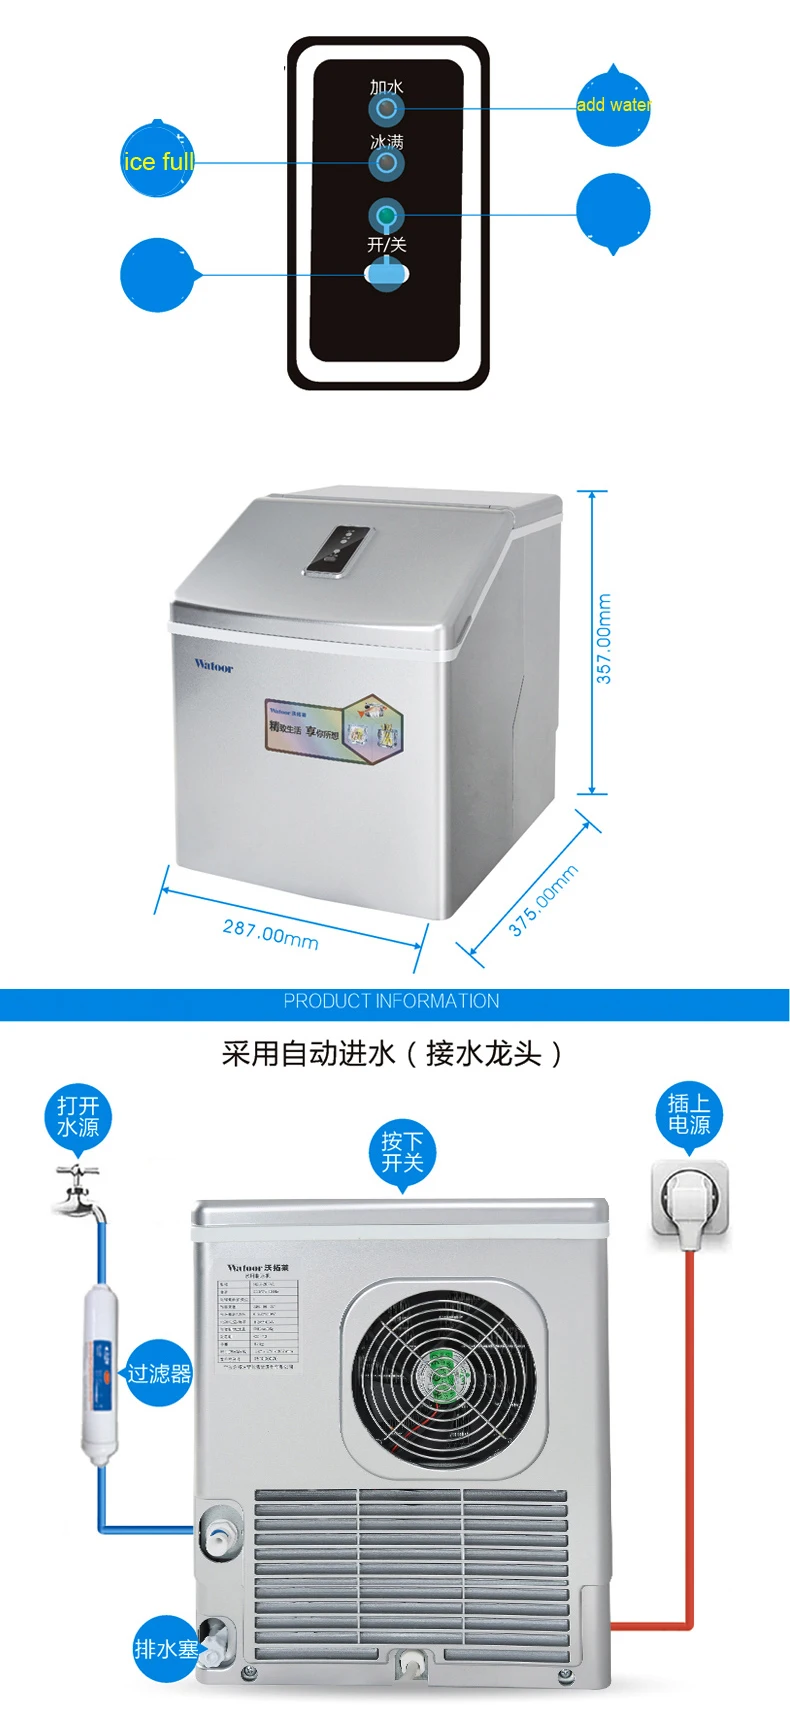 IS-HZB-20F Aautomatic Water Intake Ice Cube Maker Machine For Juicer Bar